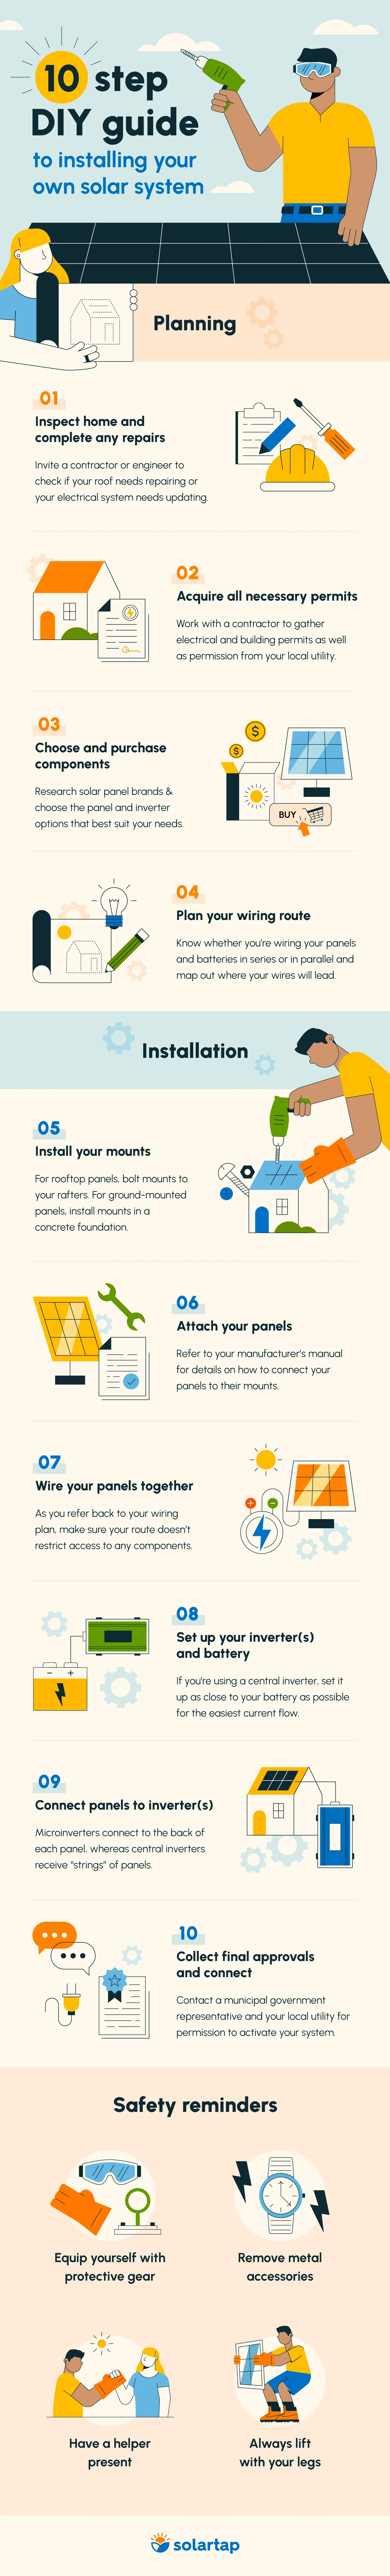 guide to installing solar system